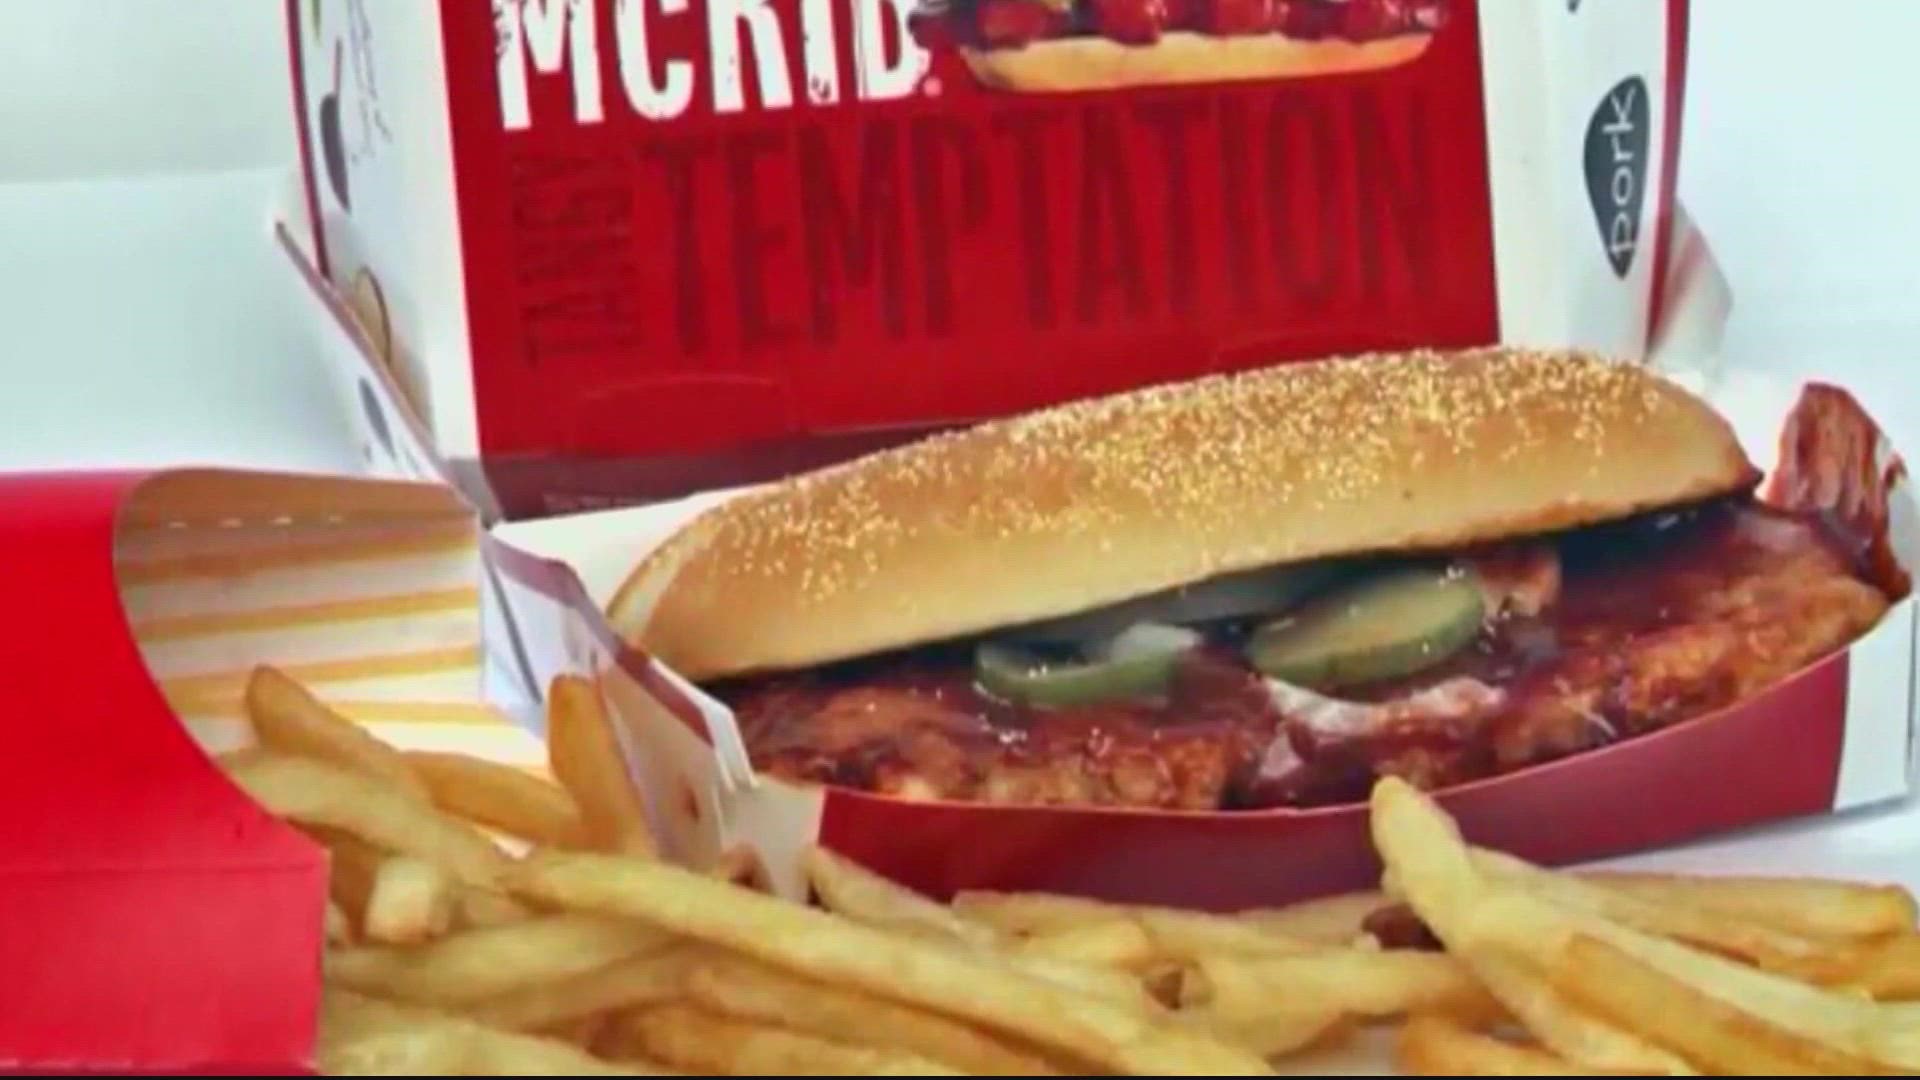 Time is ticking to taste the McDonald's McRib. The pork sandwich is back for a limited time.